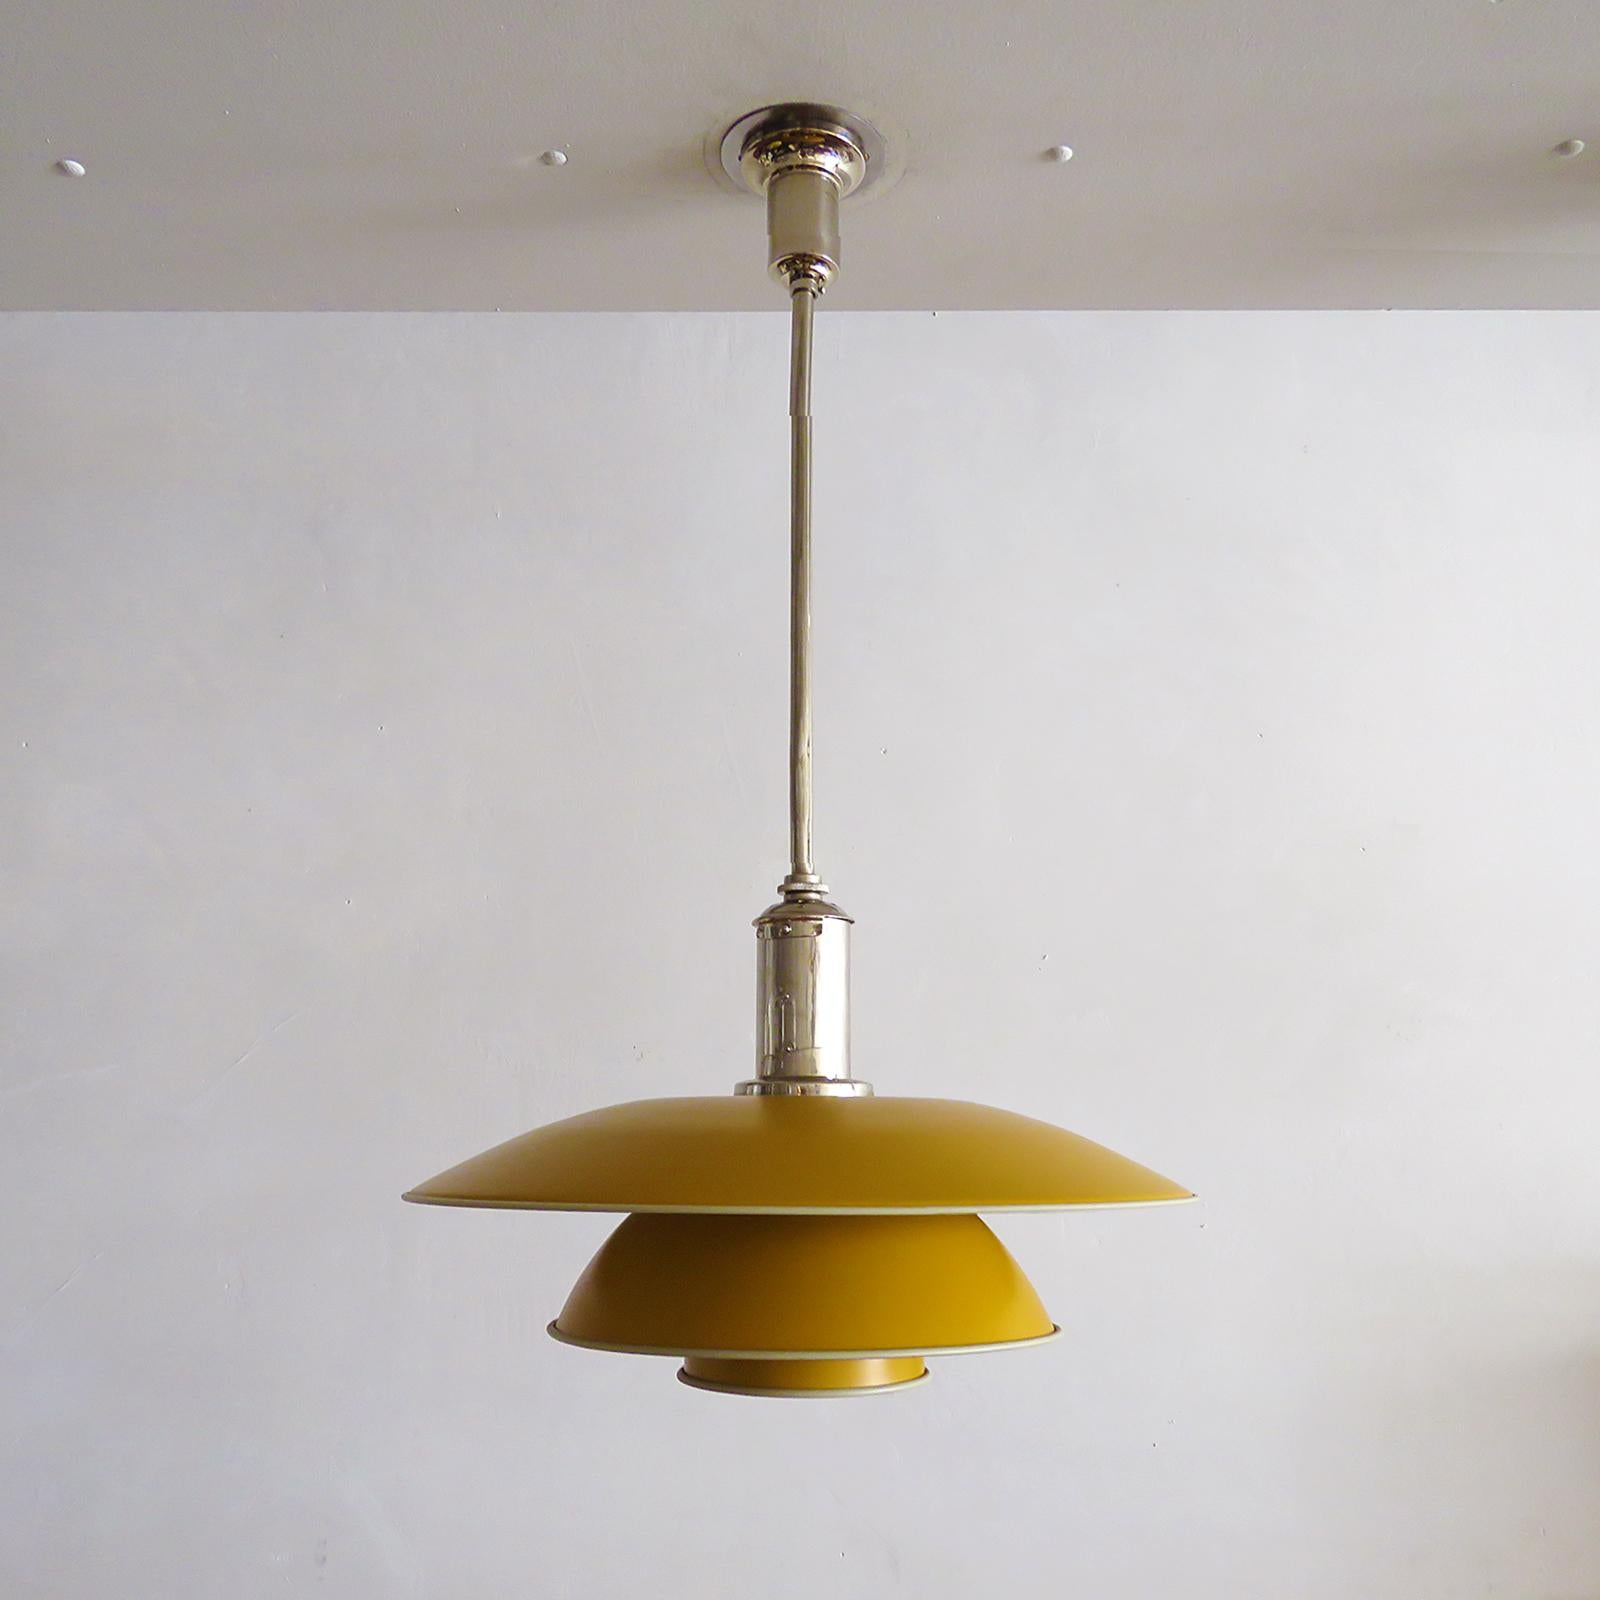 rare 1930s PH-4 pendant light by Poul Henningsen for Louis Poulsen with original shade set, in dark yellow/orange painted metal on an original chrome plated bayonet socket housing, stem and canopy, stamped 'PH-4', 'Patented'.